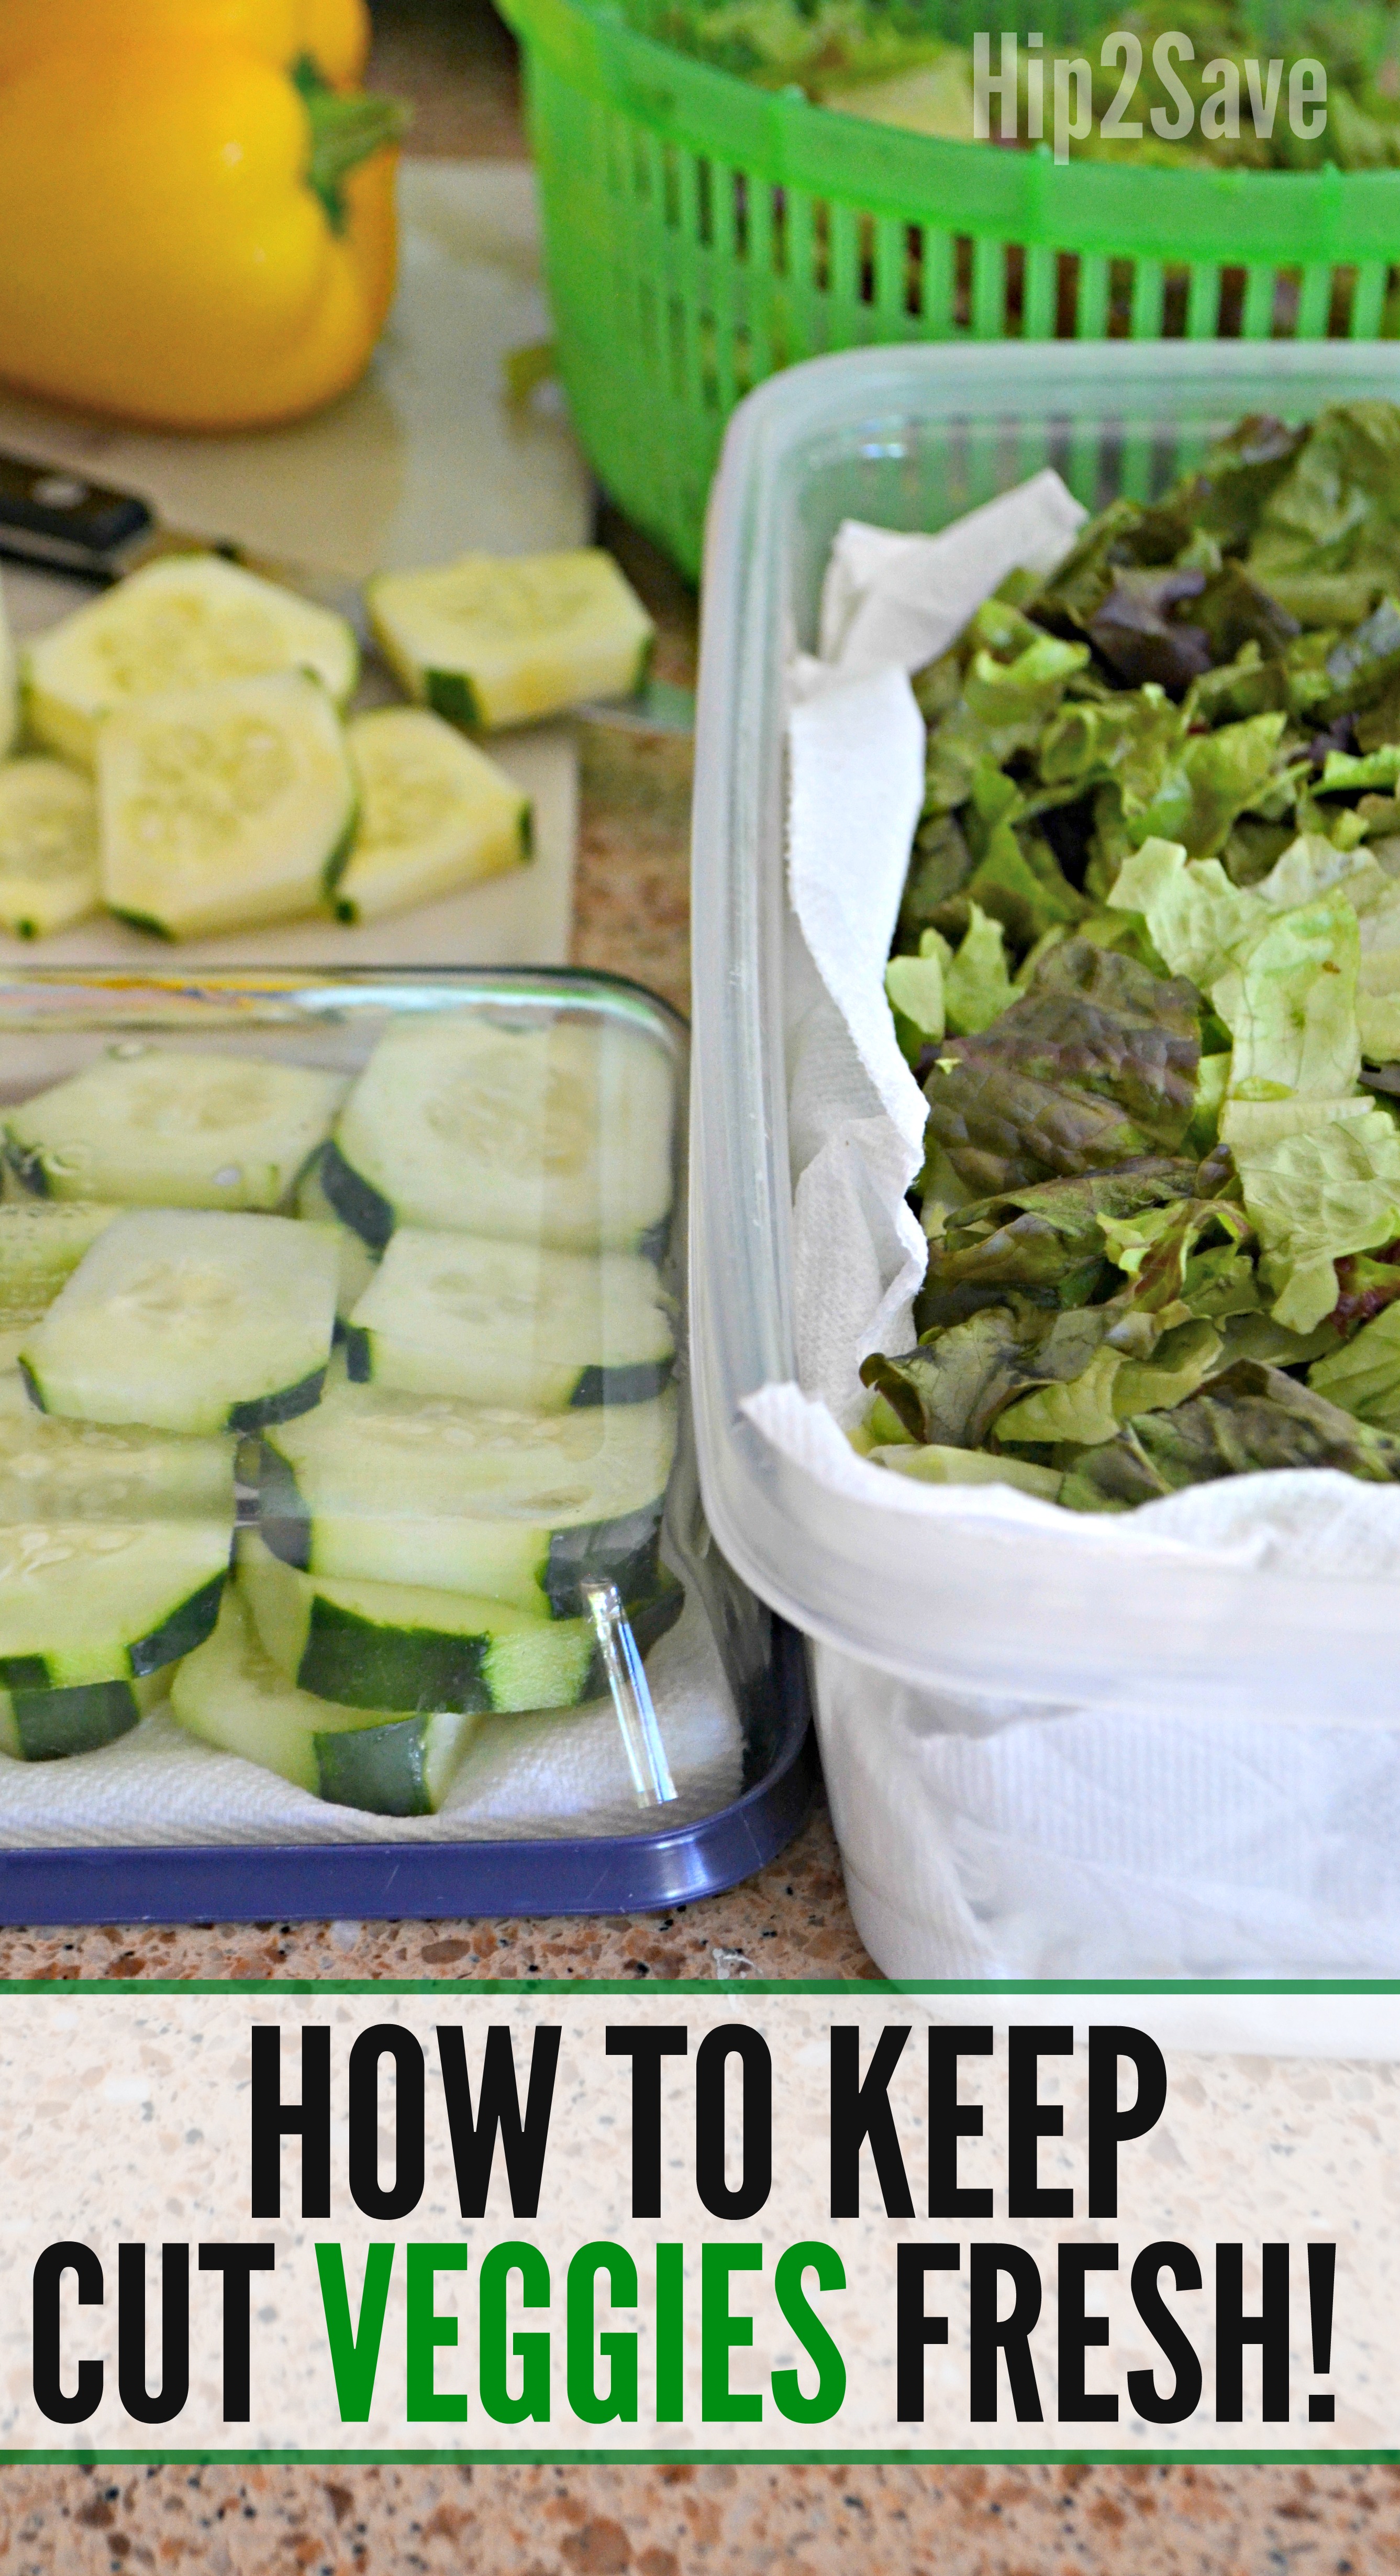 Tips for Storing Cut Vegetables to Keep Them Fresh